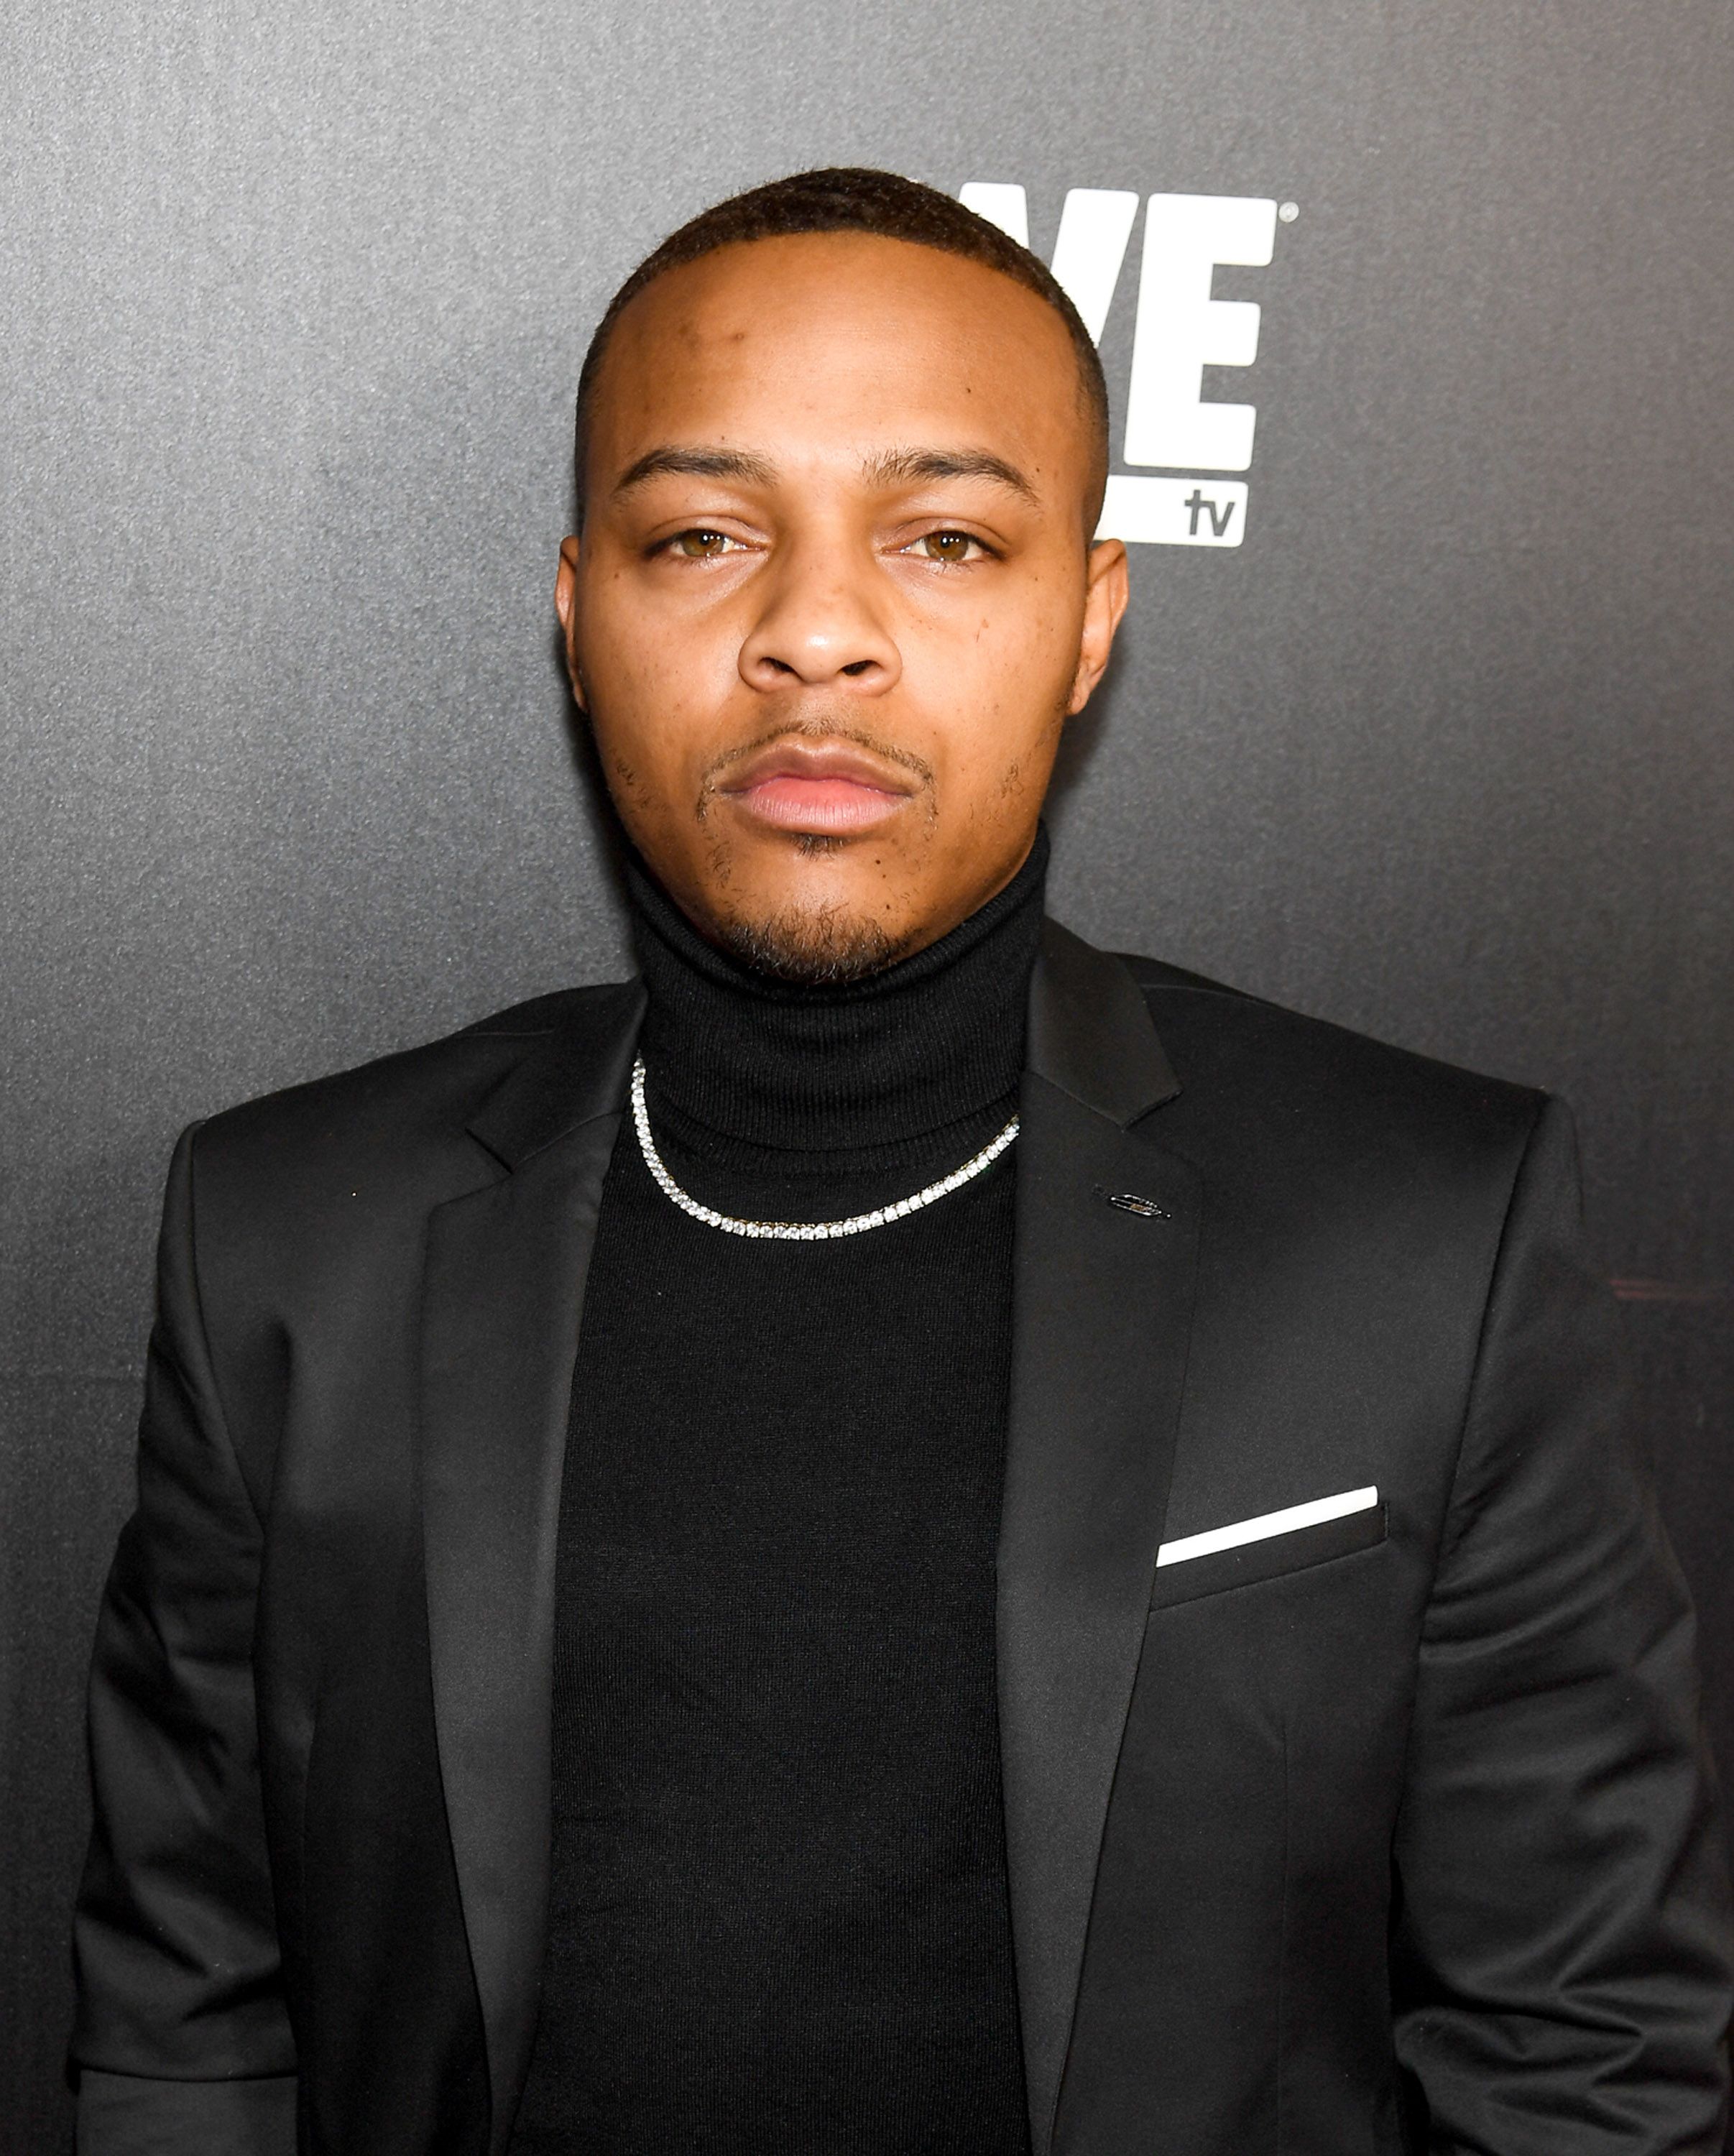 Bow Wow at Woodruff Arts Center in Atlanta on January 9, 2018 | Photo: Getty Images